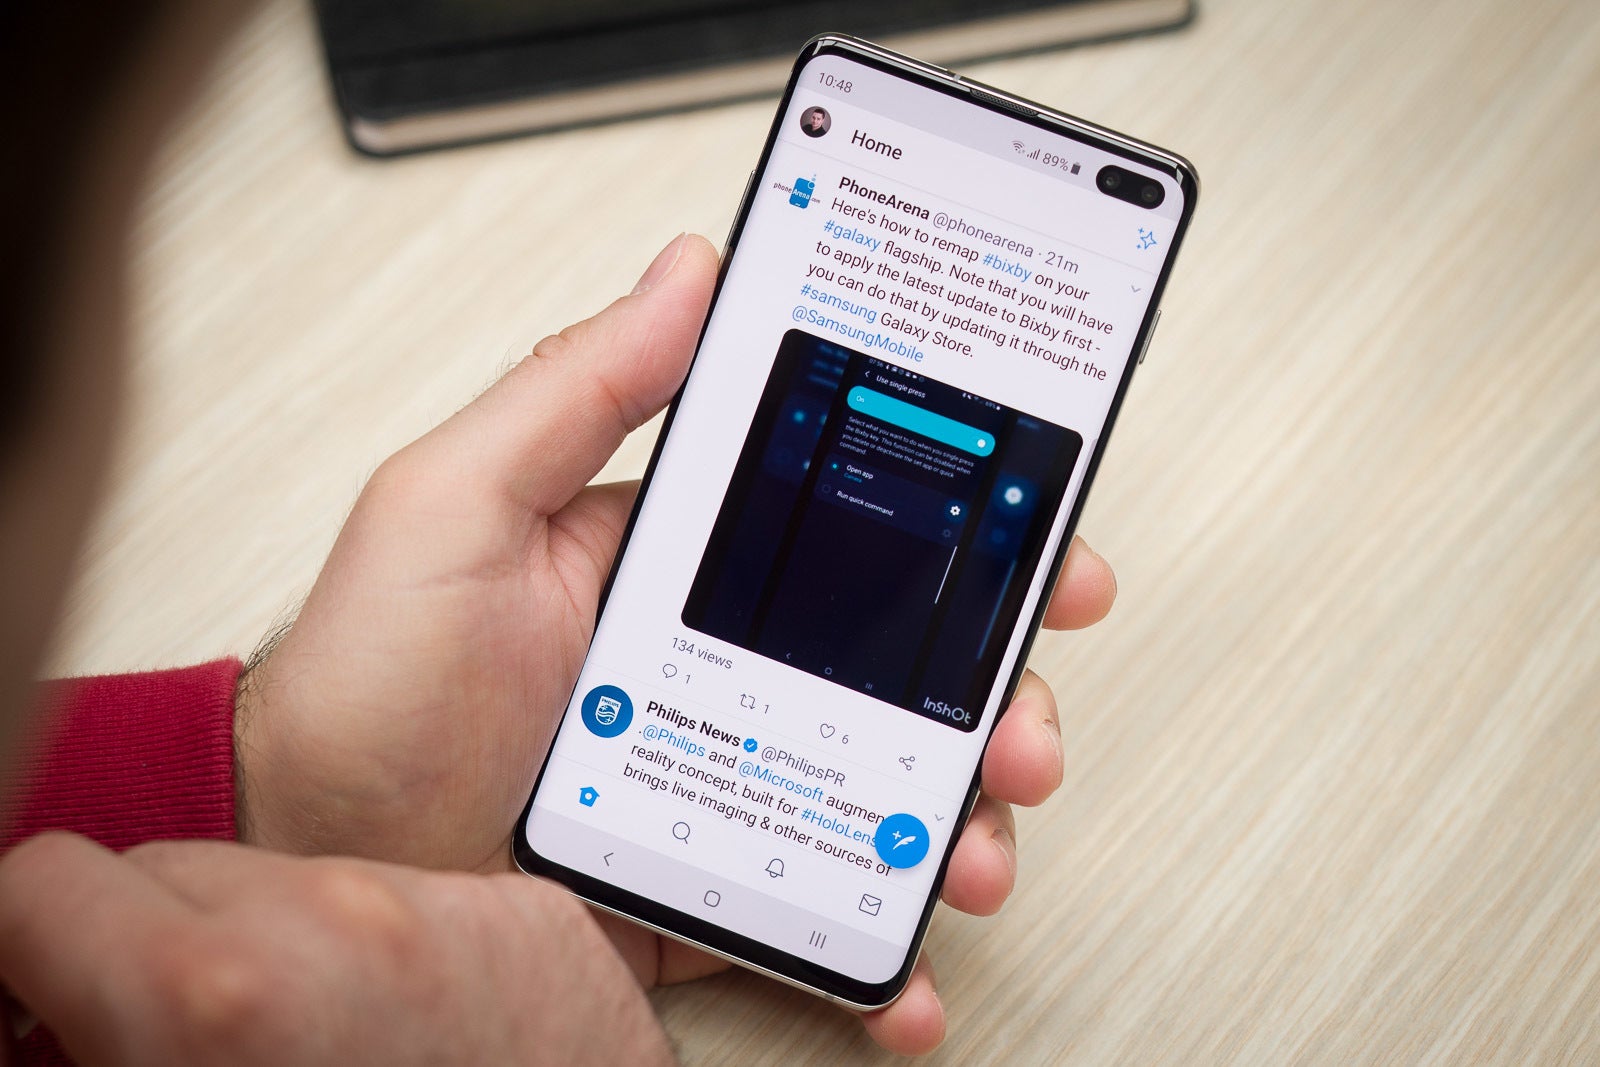 The Galaxy S10+ impressed with its sleek design - Top companies reveal to us the twisty path of smartphone design